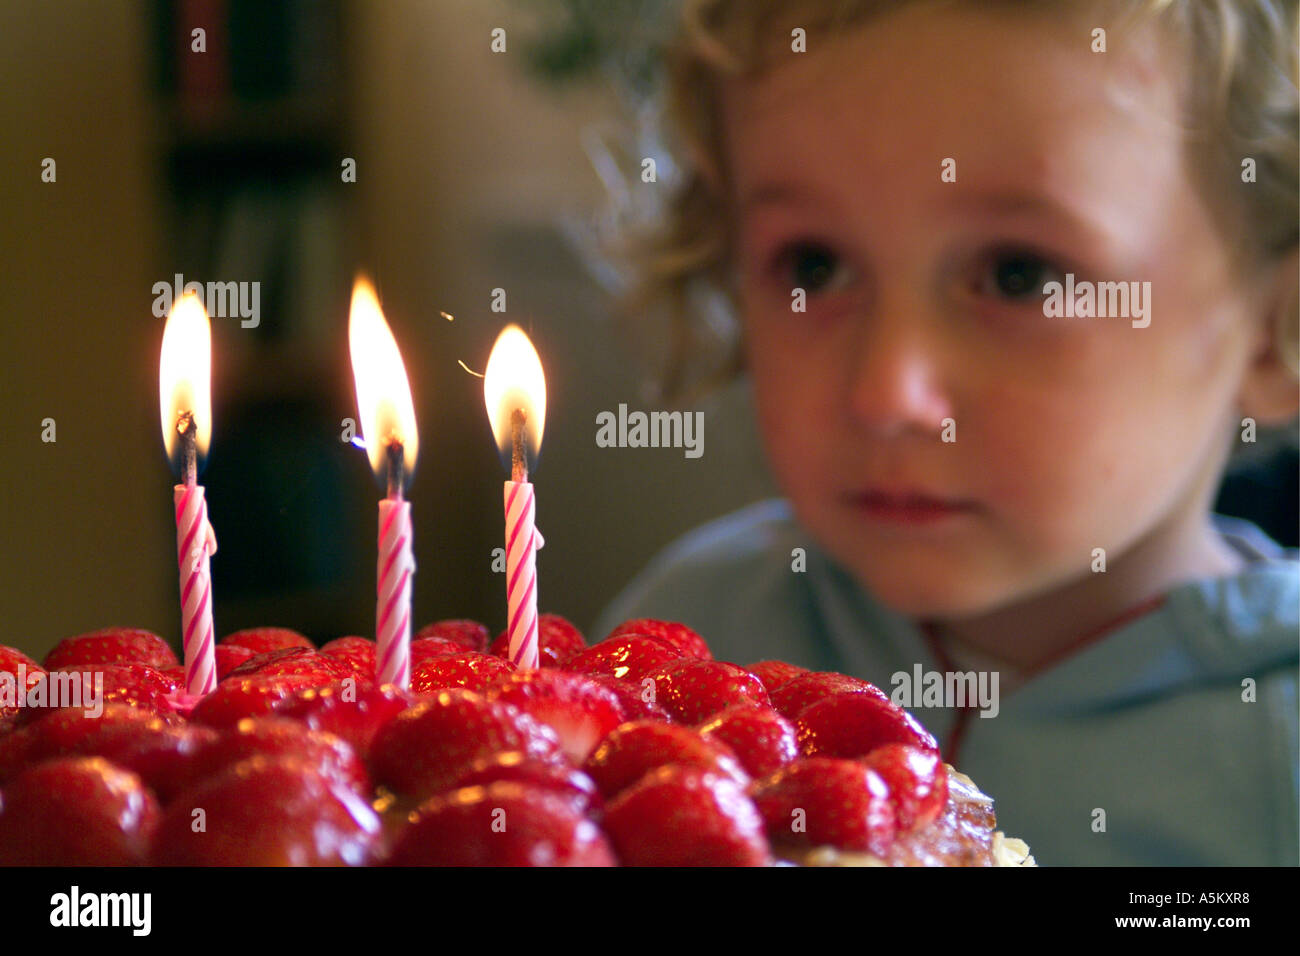 Three year old girl child making a wish before blowing out the candles on her birthday cake Stock Photo